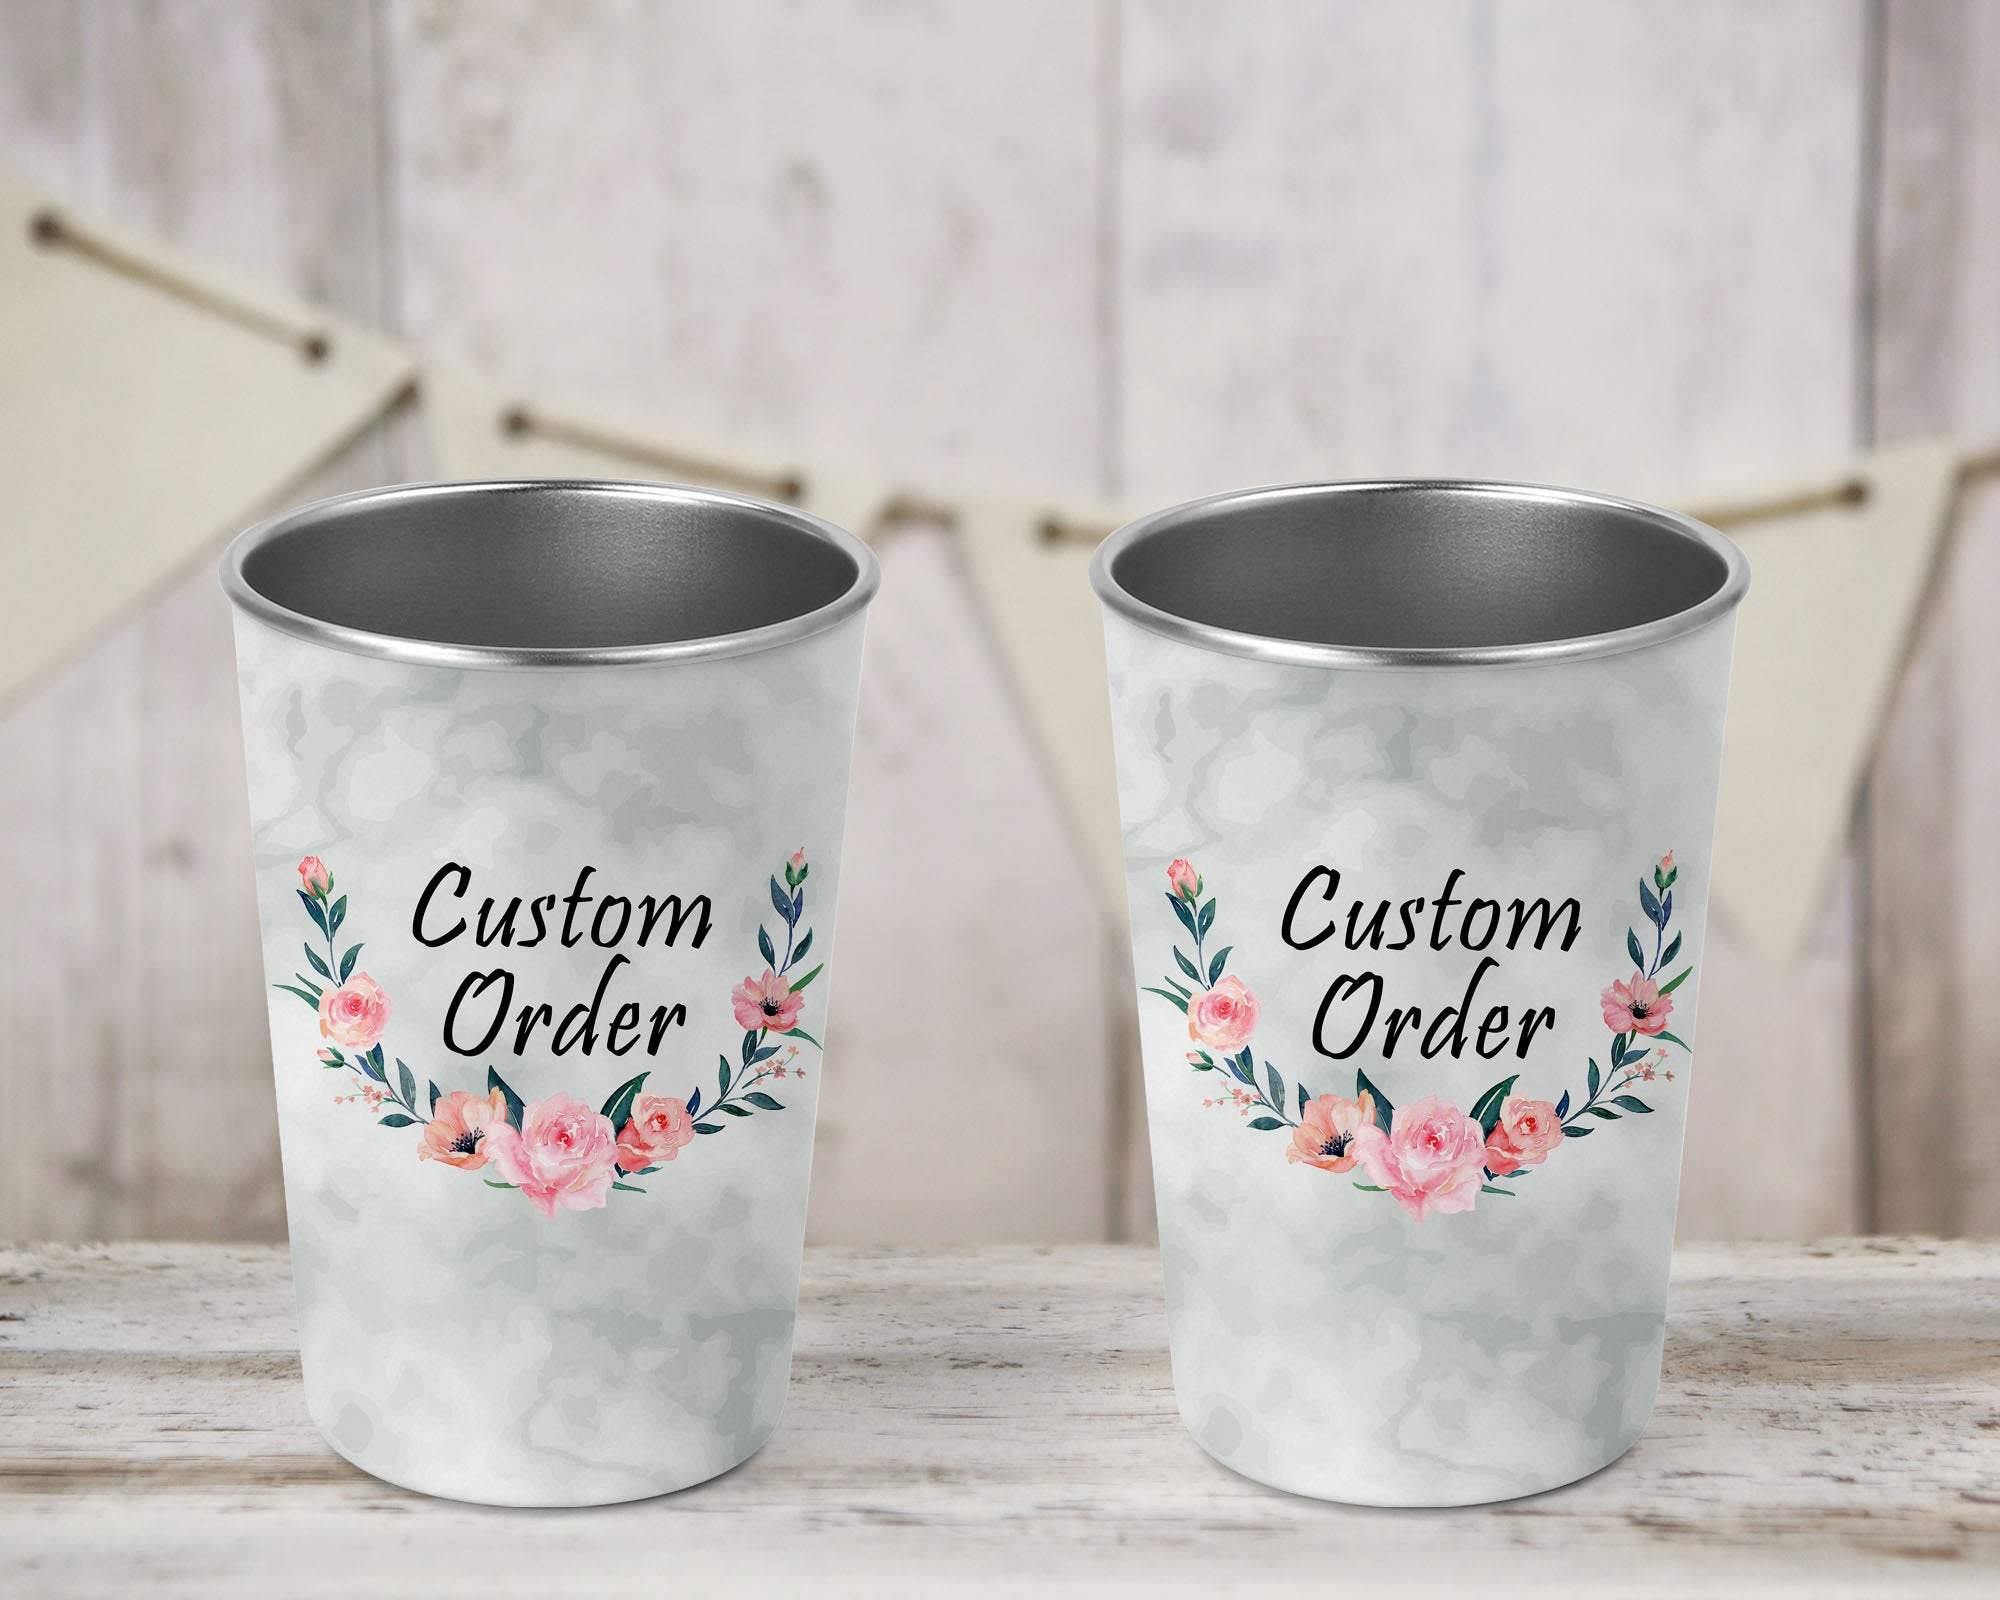 Stainless Steel Pint Tumbler | Personalized Tumbler | Custom Order - This & That Solutions - Stainless Steel Pint Tumbler | Personalized Tumbler | Custom Order - Personalized Gifts & Custom Home Decor